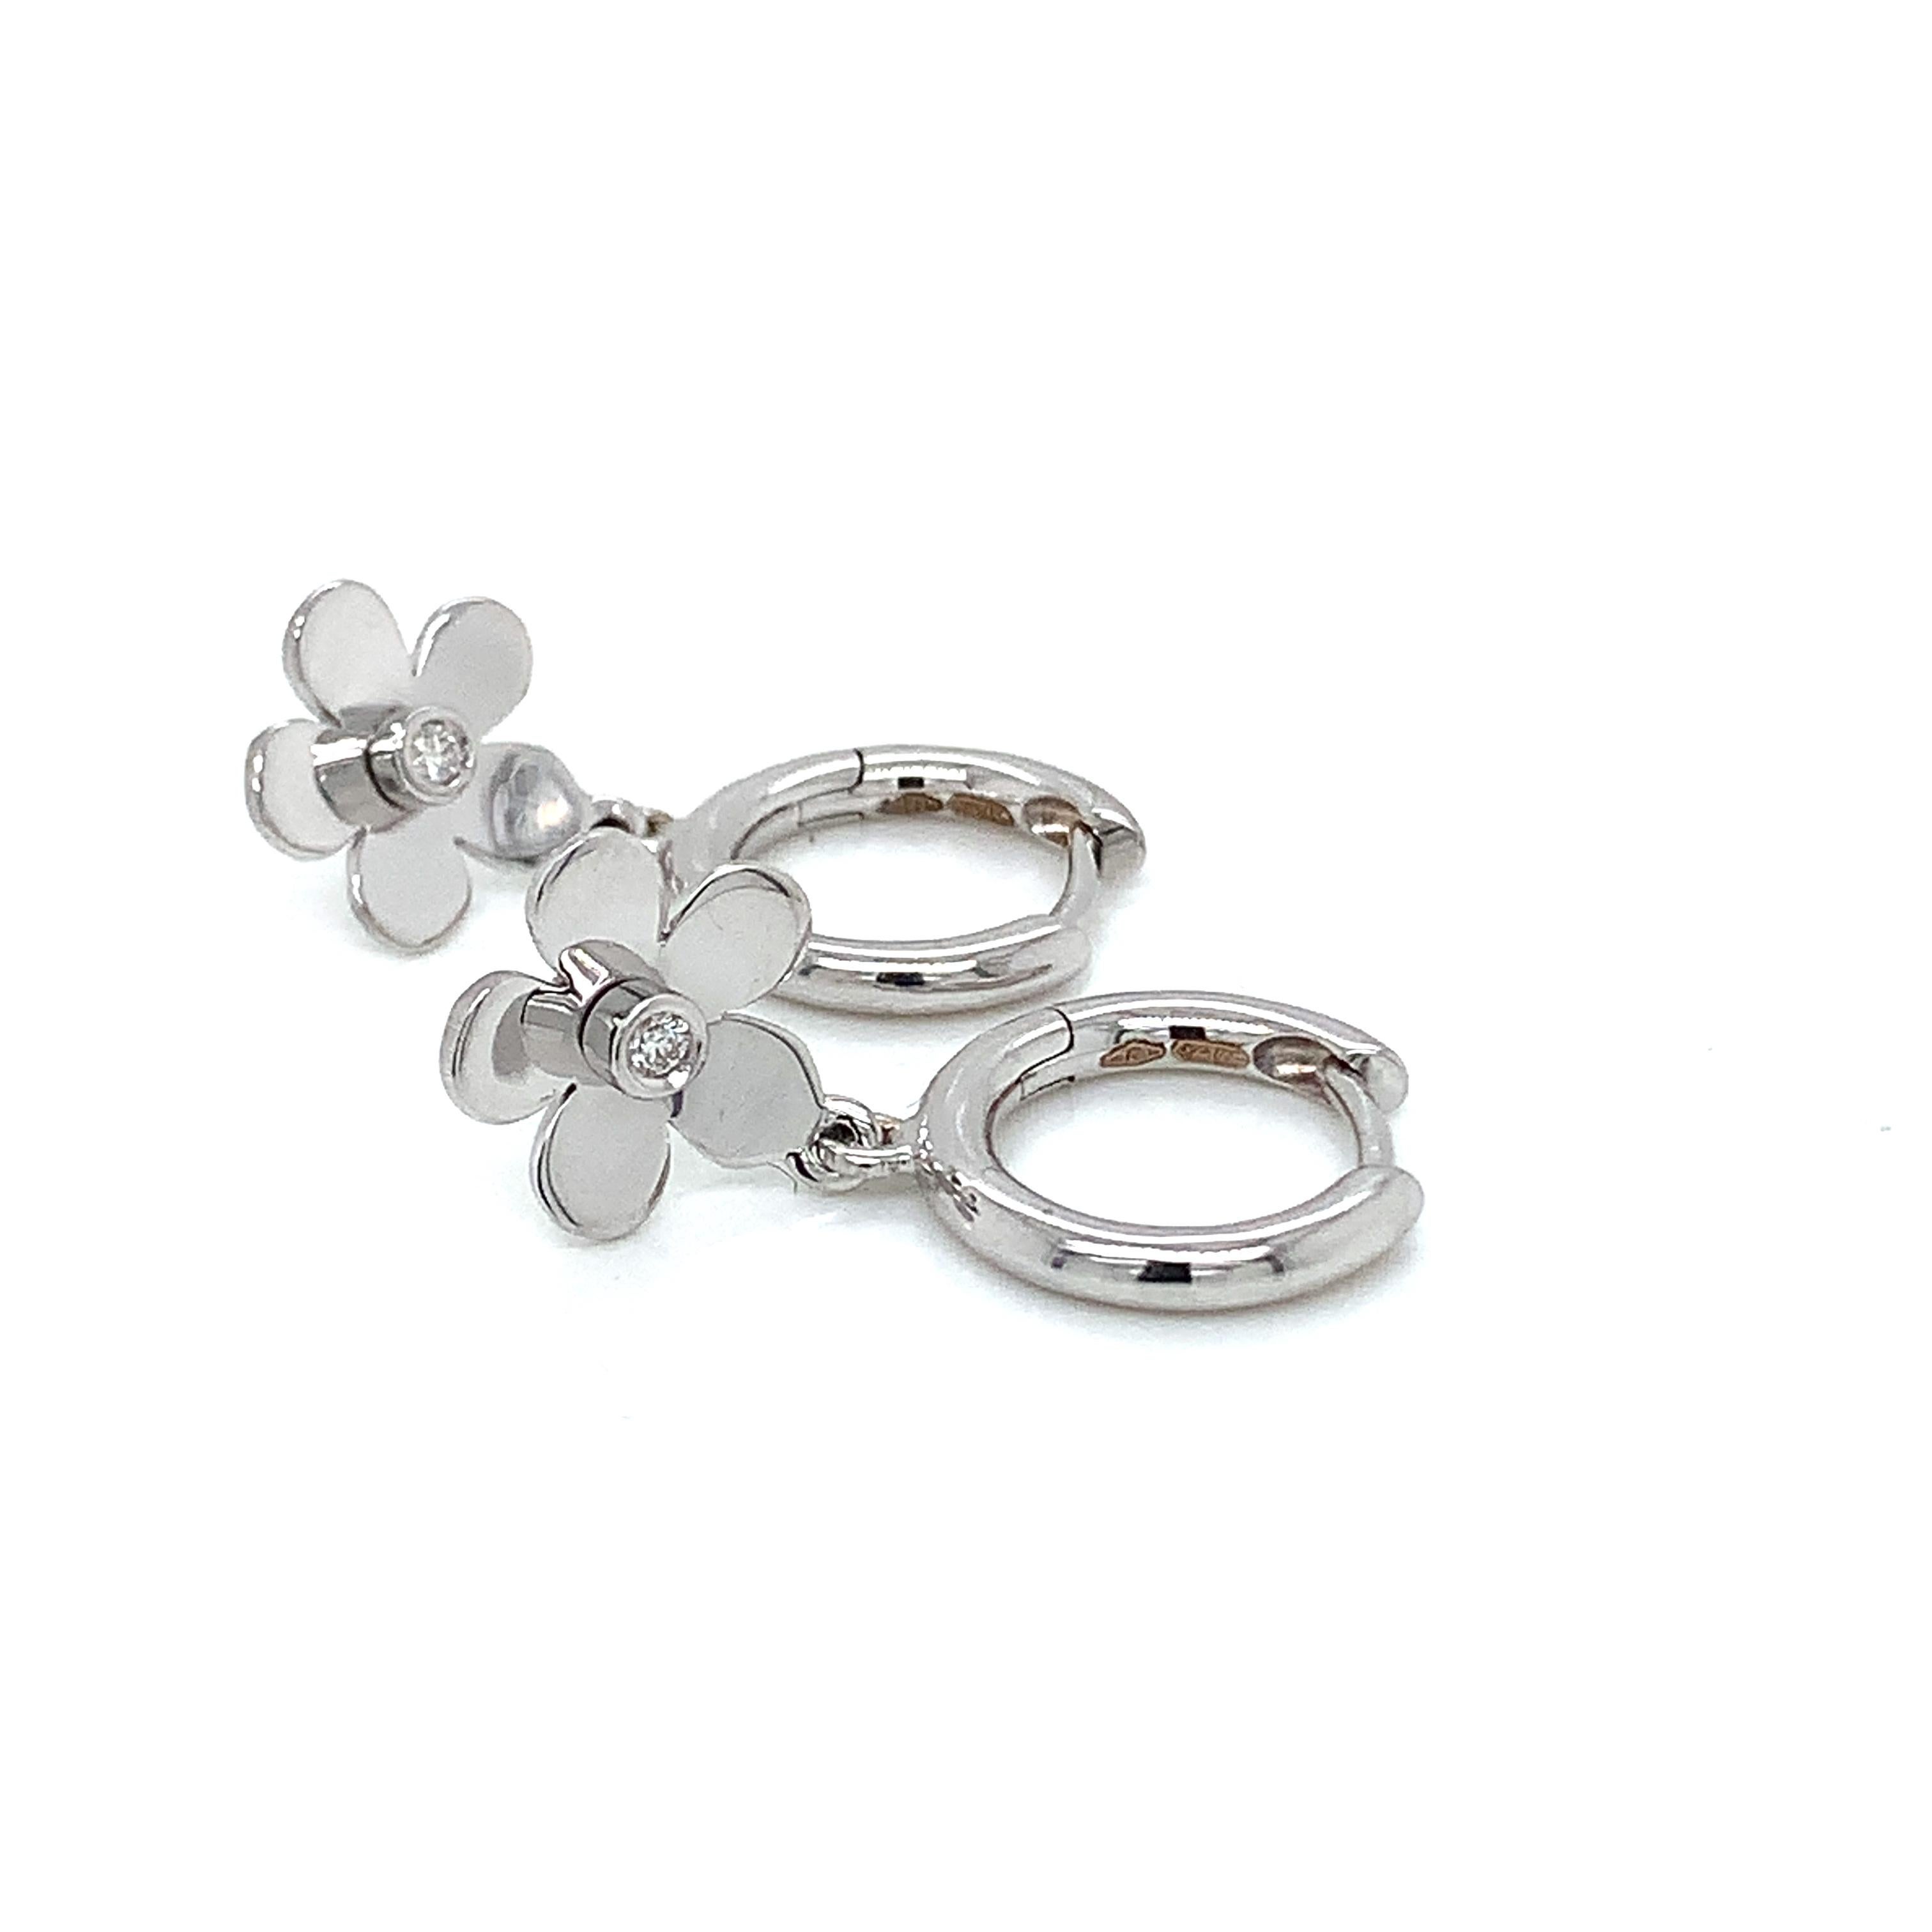 Garavelli 18 Karat White Gold Flower Garavelli Earrings, from Minuette collection, with   diamonds at the center of each flowers.
Earrings length mm 23
18kt GOLD  : gr 4.37
White diamonds ct 0.04   
Made in Italy